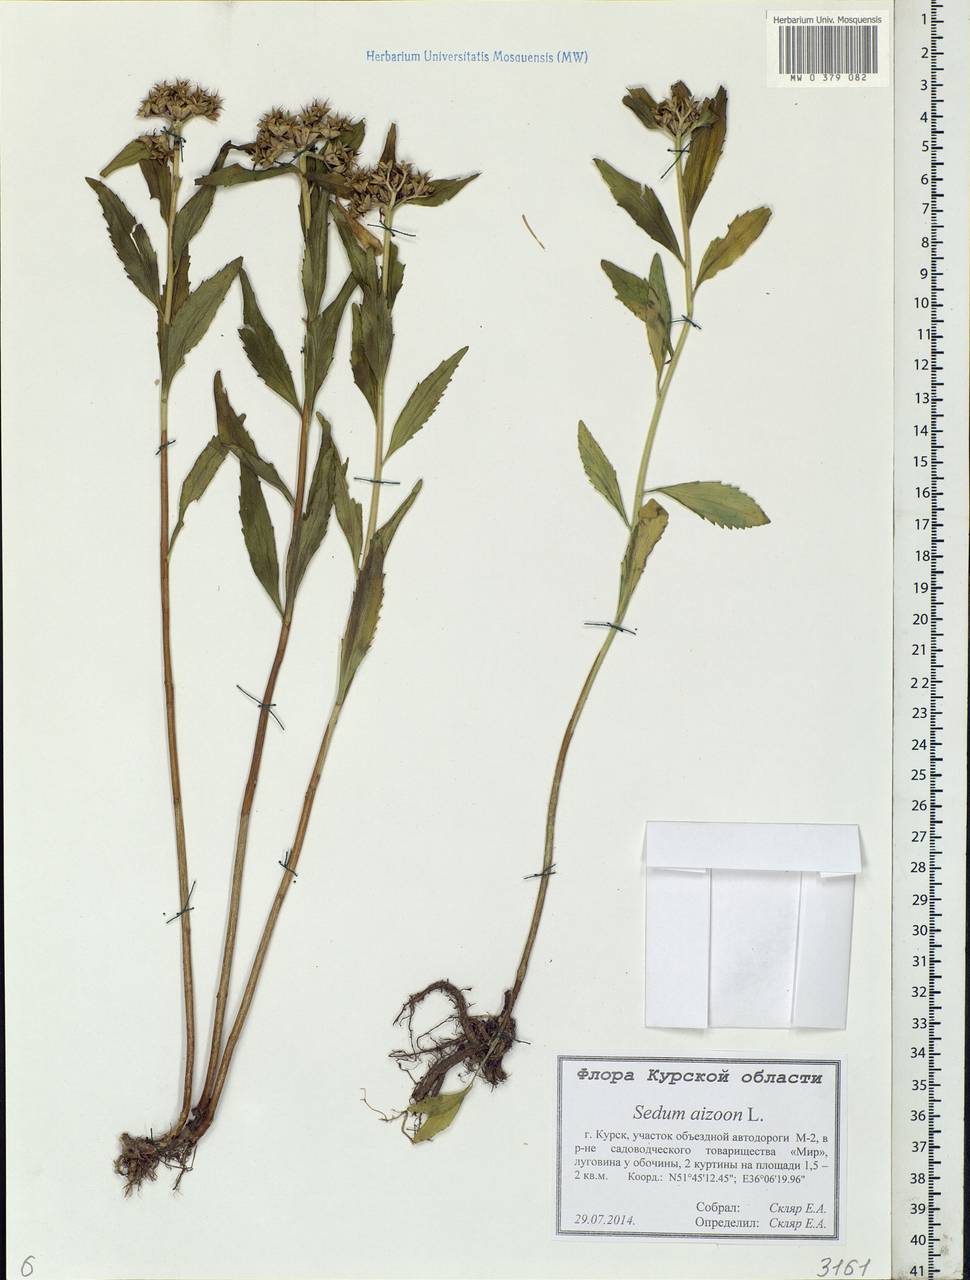 Phedimus aizoon (L.) 't Hart, Eastern Europe, Central forest-and-steppe region (E6) (Russia)